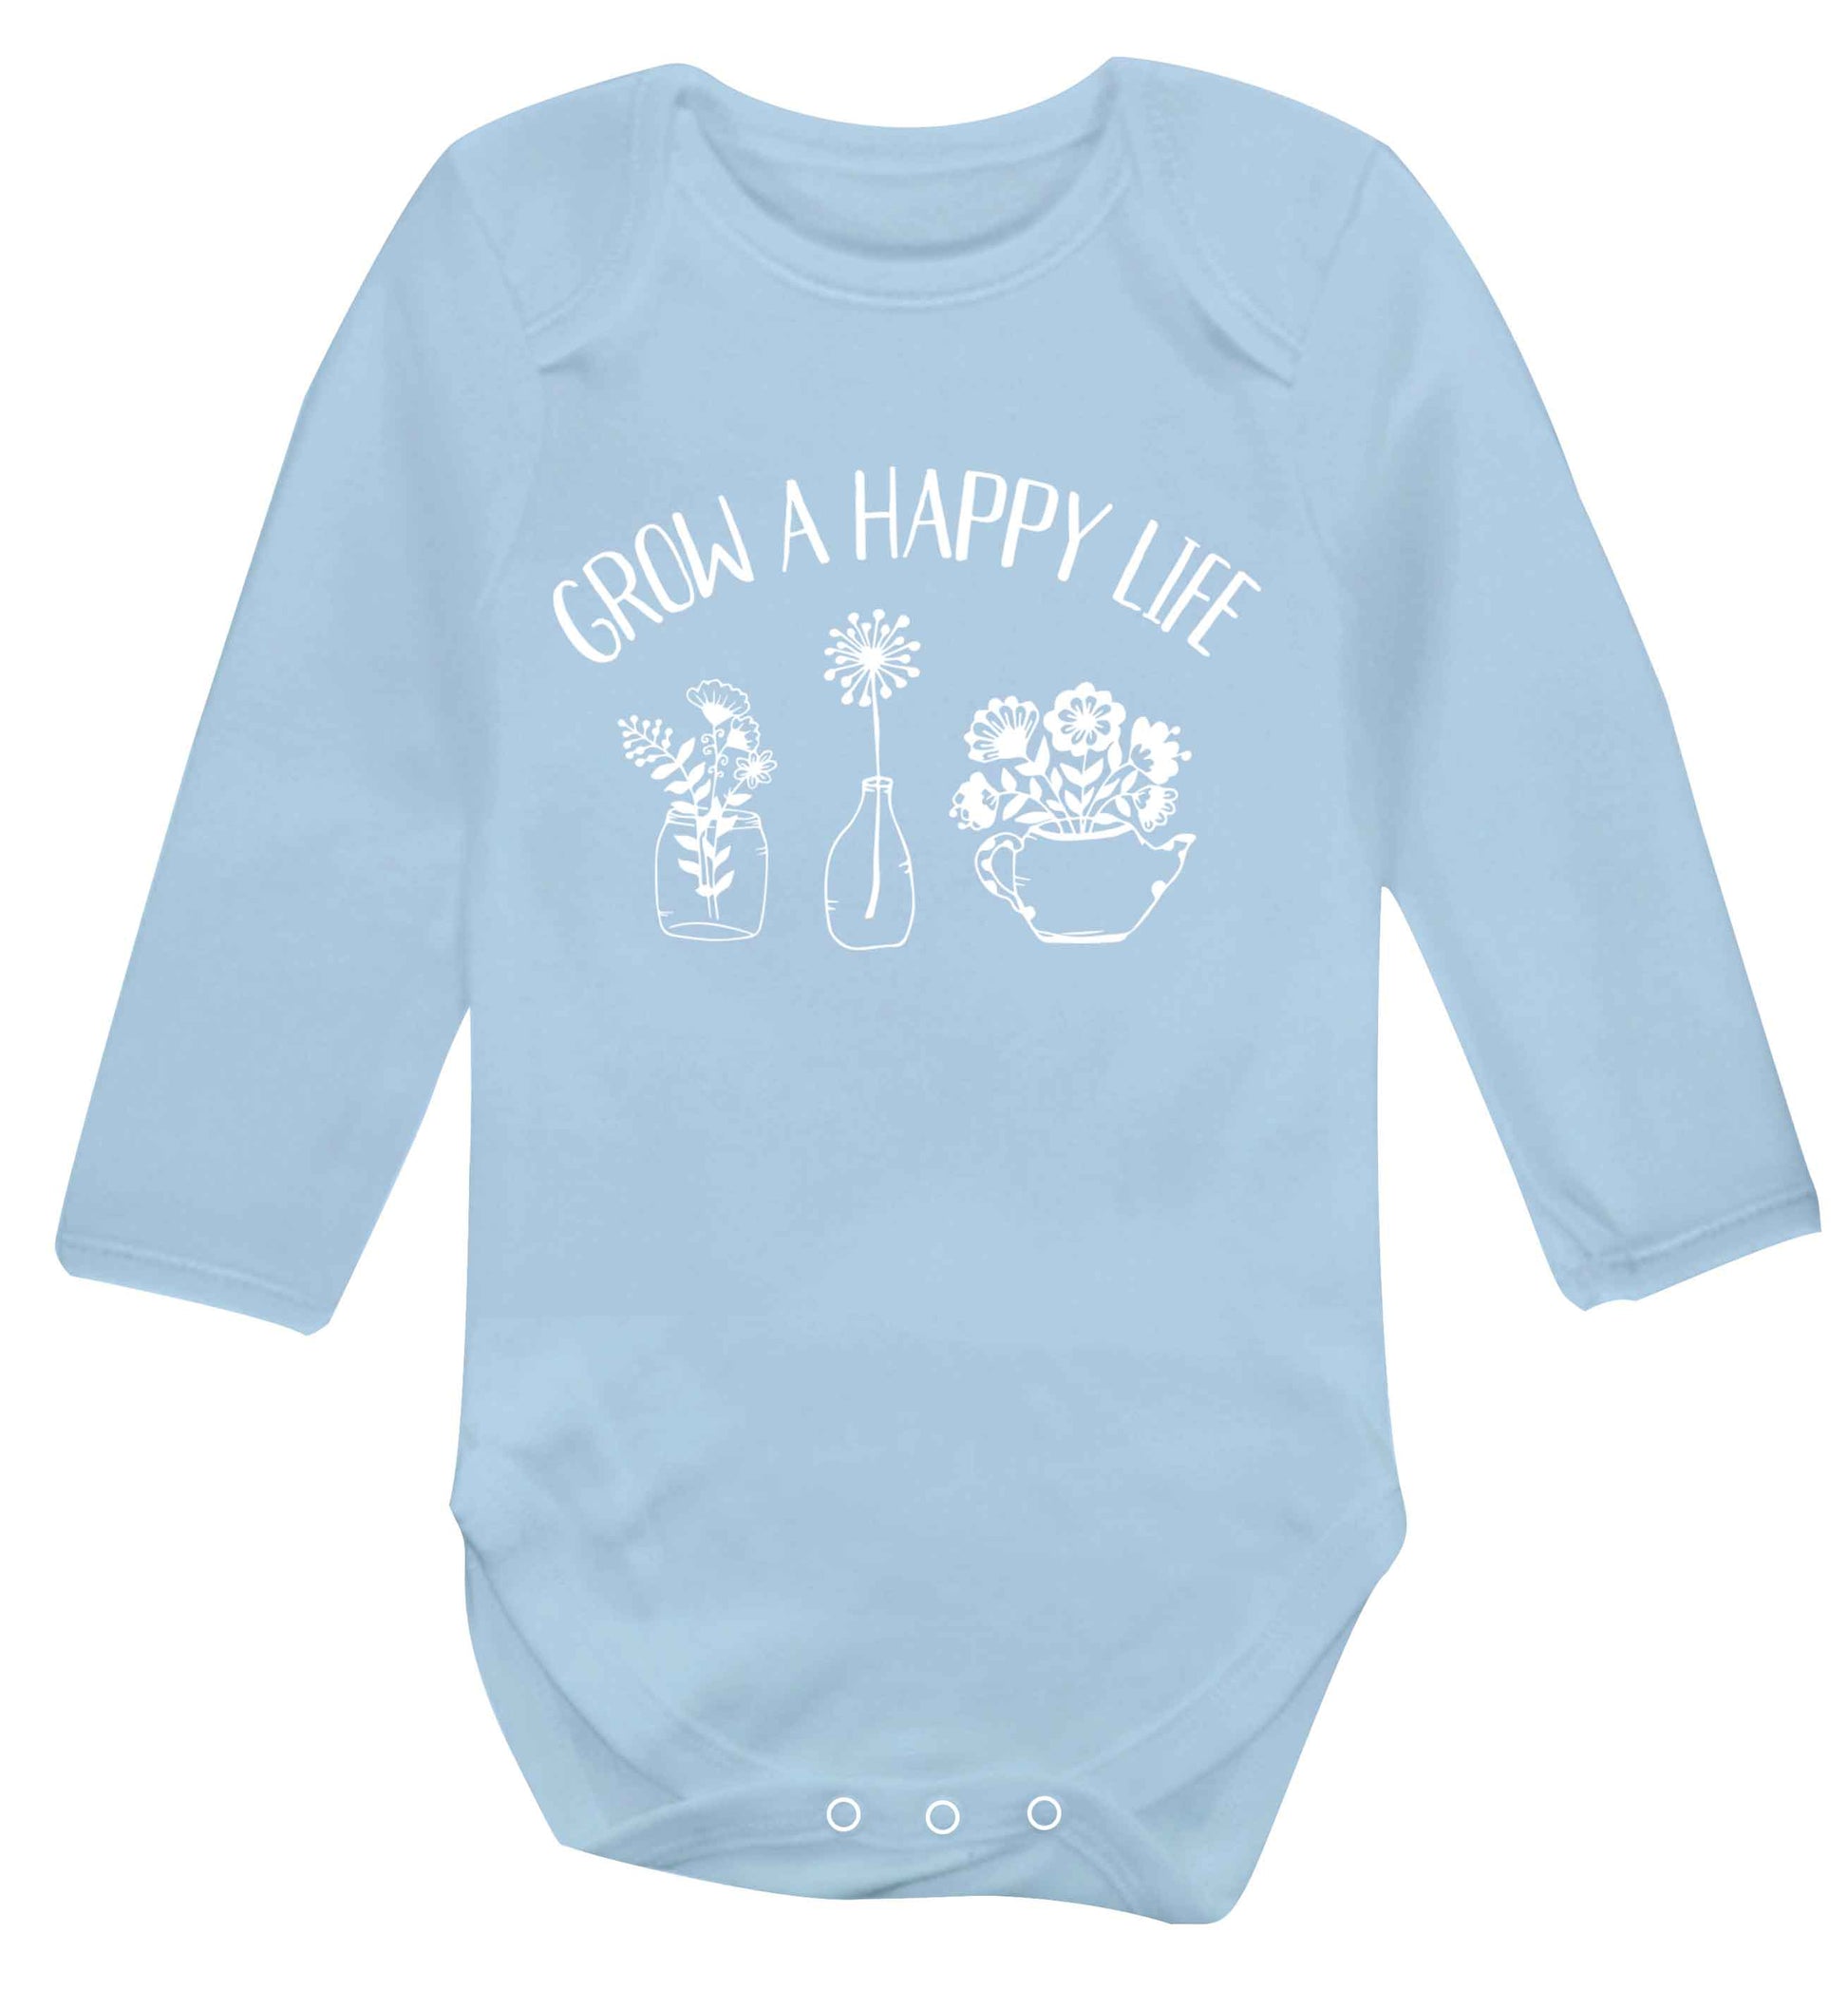 Grow a happy life Baby Vest long sleeved pale blue 6-12 months